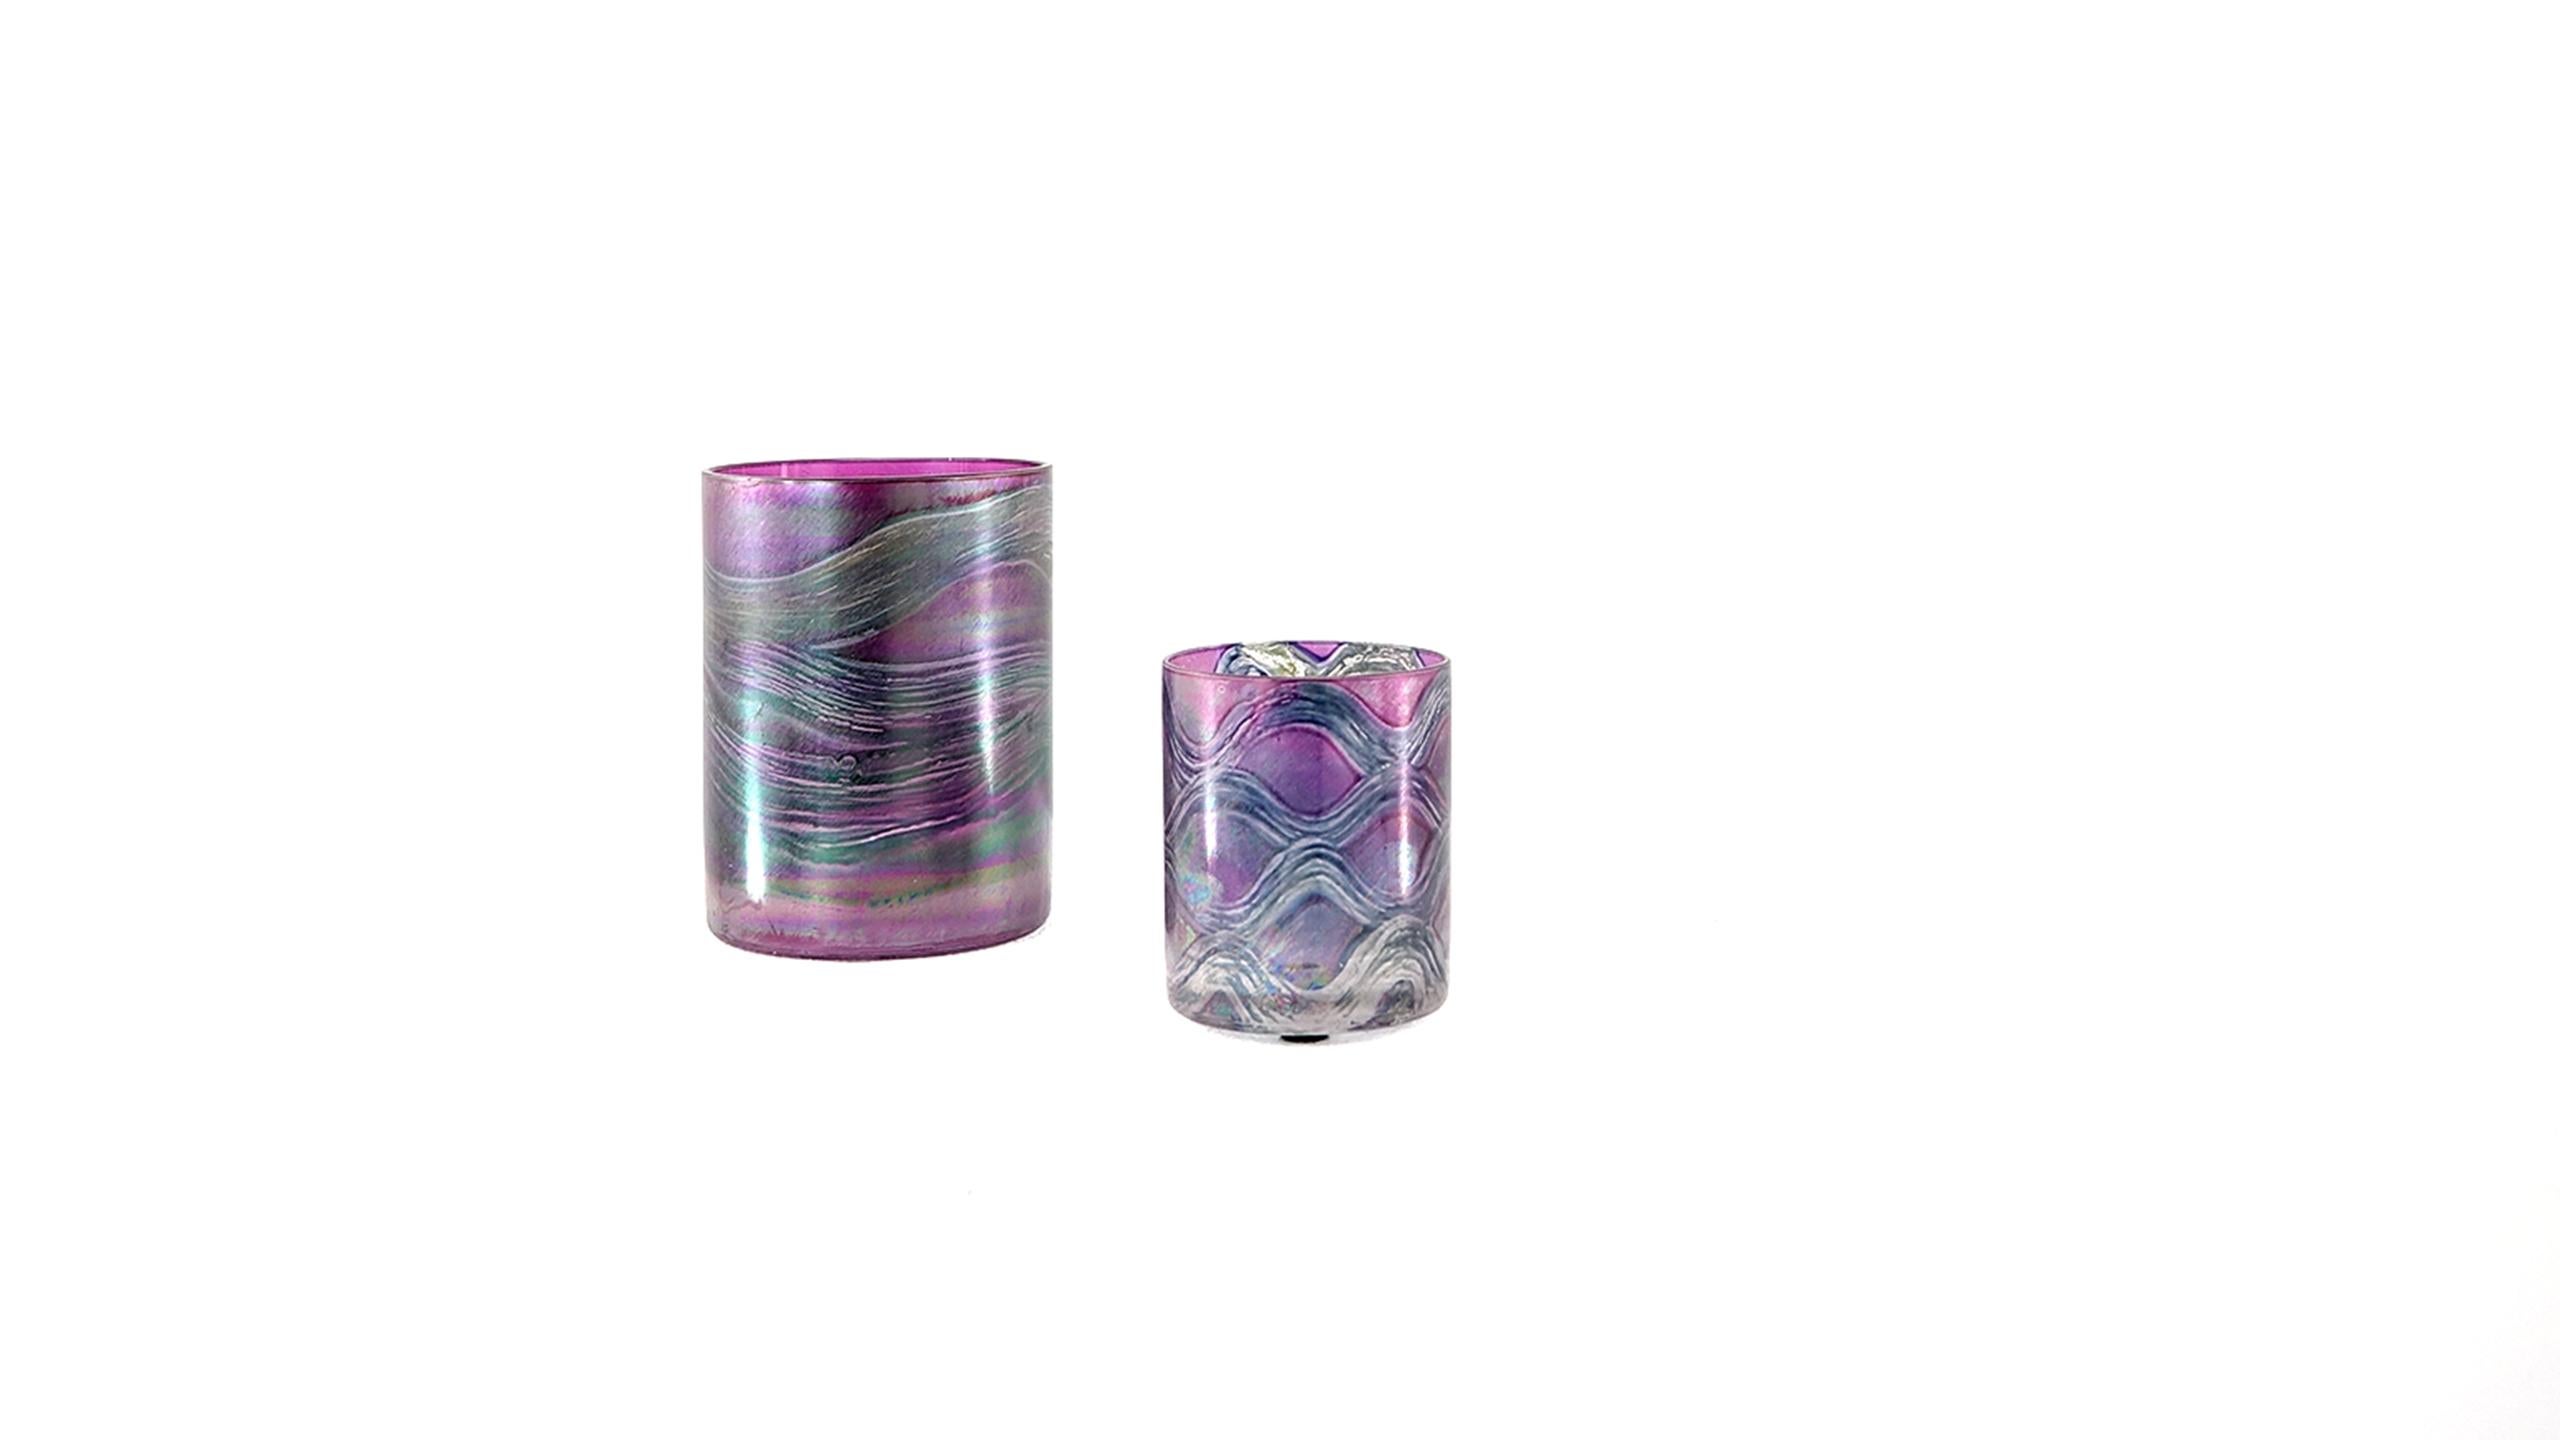 Klaus and Isgard Moje cup vase Hamburg, 1973

Cylinder on smooth bottom. On the surface, which is satin in an inclined guide, with resin-acidic Metals and oxides and marbled. 

Dimension

Left cup vase: Circular 8 cm, high 10.5 cm

Middle